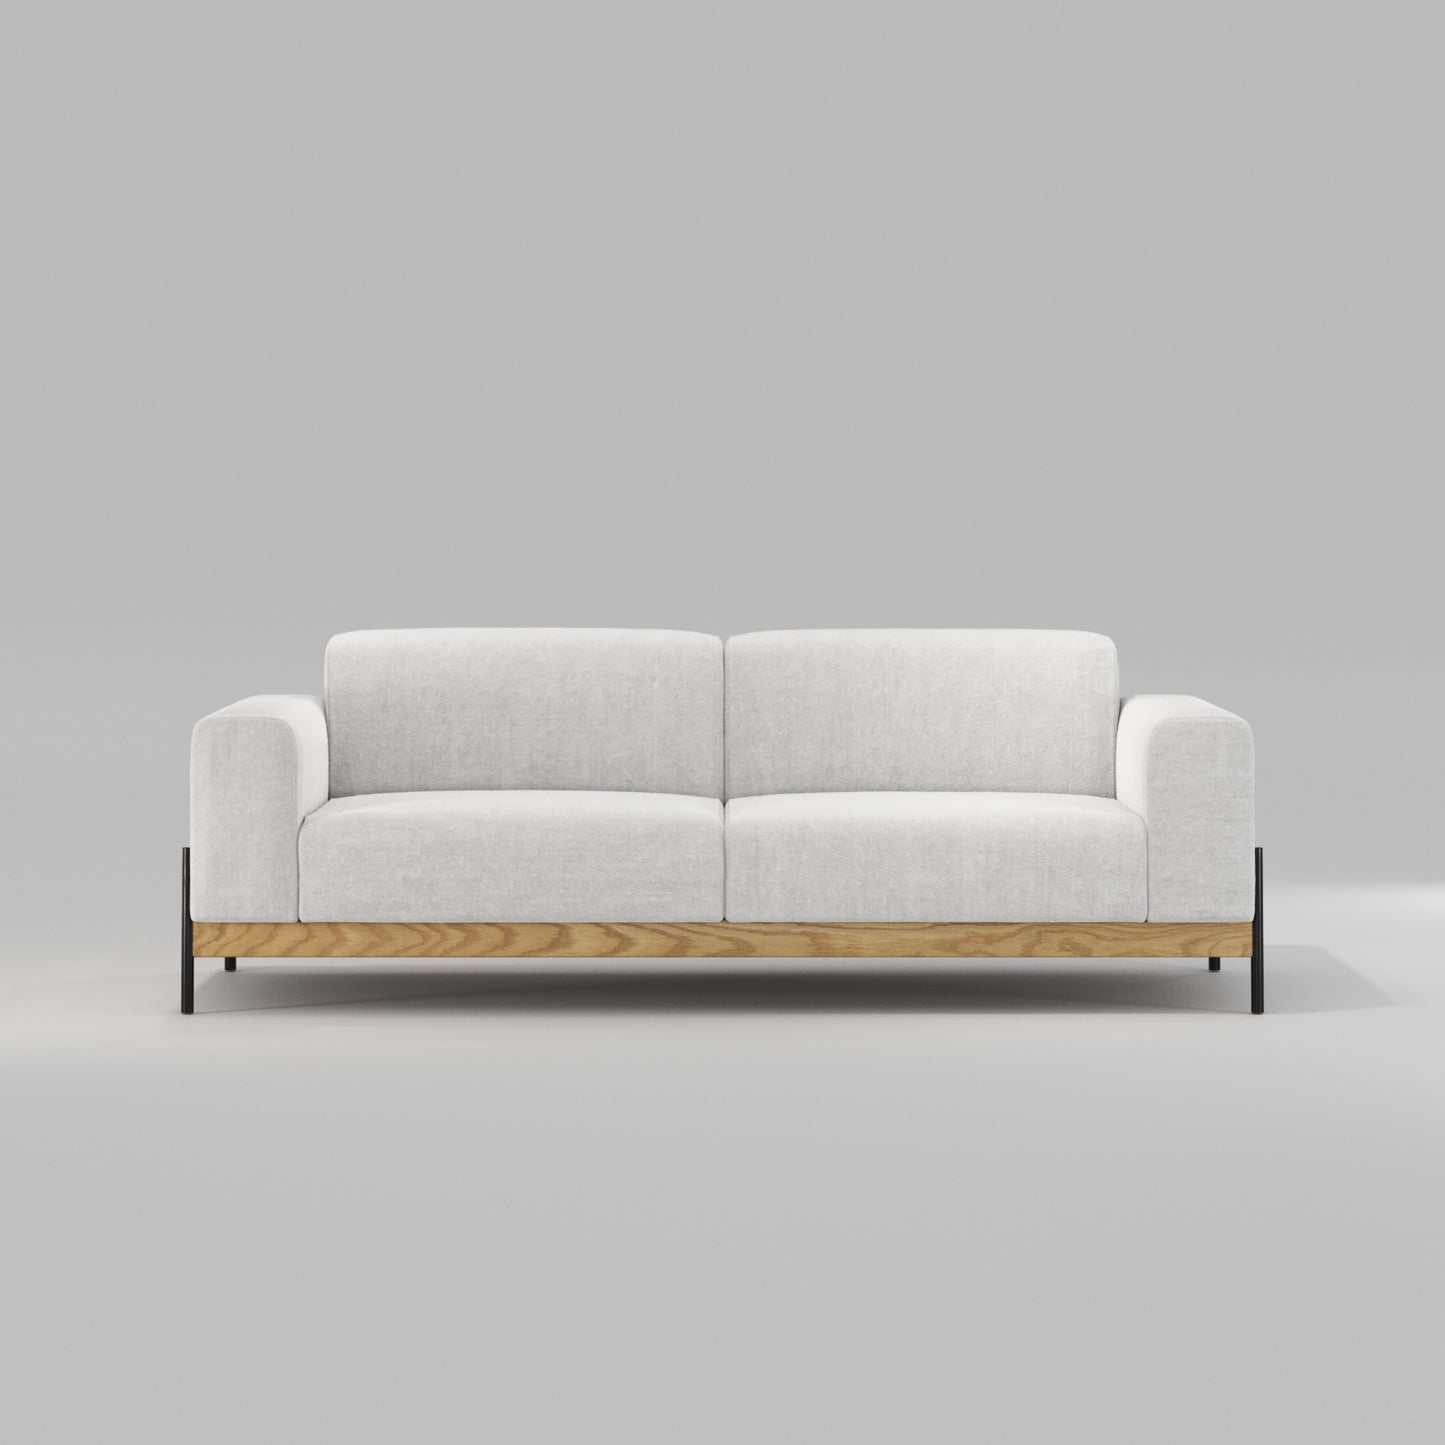 BOWIE 2 Seater Sofa